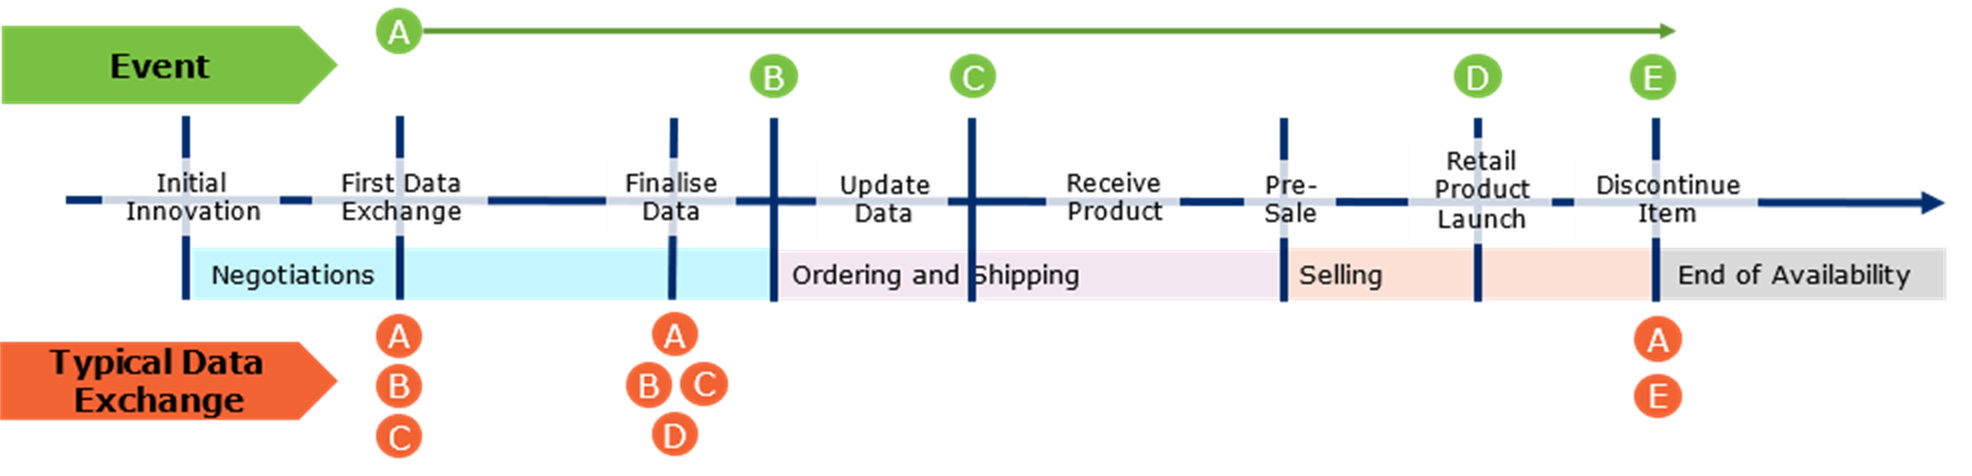 14.1 Product Life Cycle Attributes – Timeline Example - Image 0